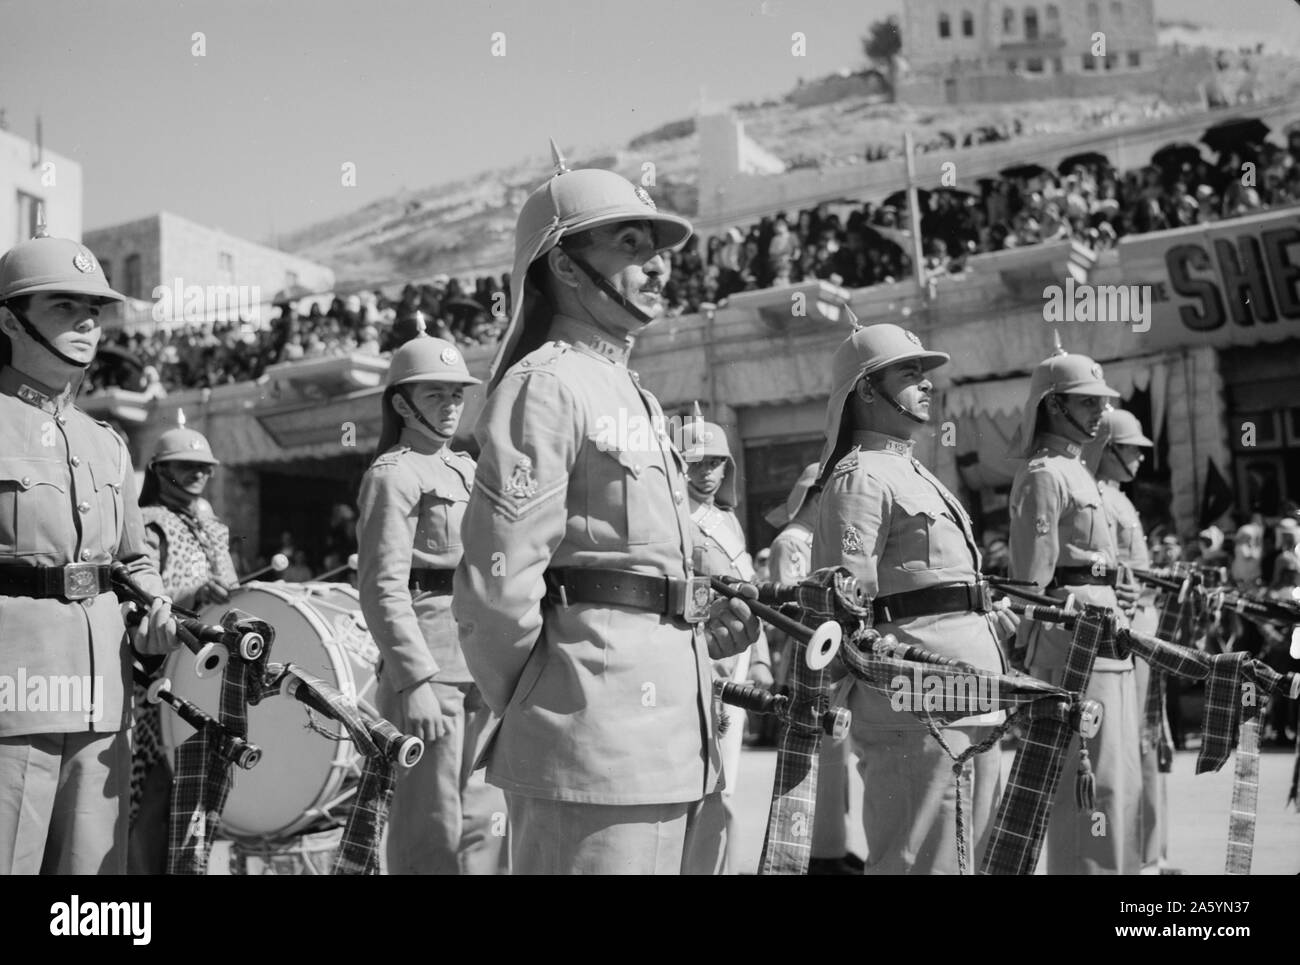 24th anniversary of Arab revolt under King Hussein & Lawrence 1940. Band of the Arab Legion lining the streets Stock Photo